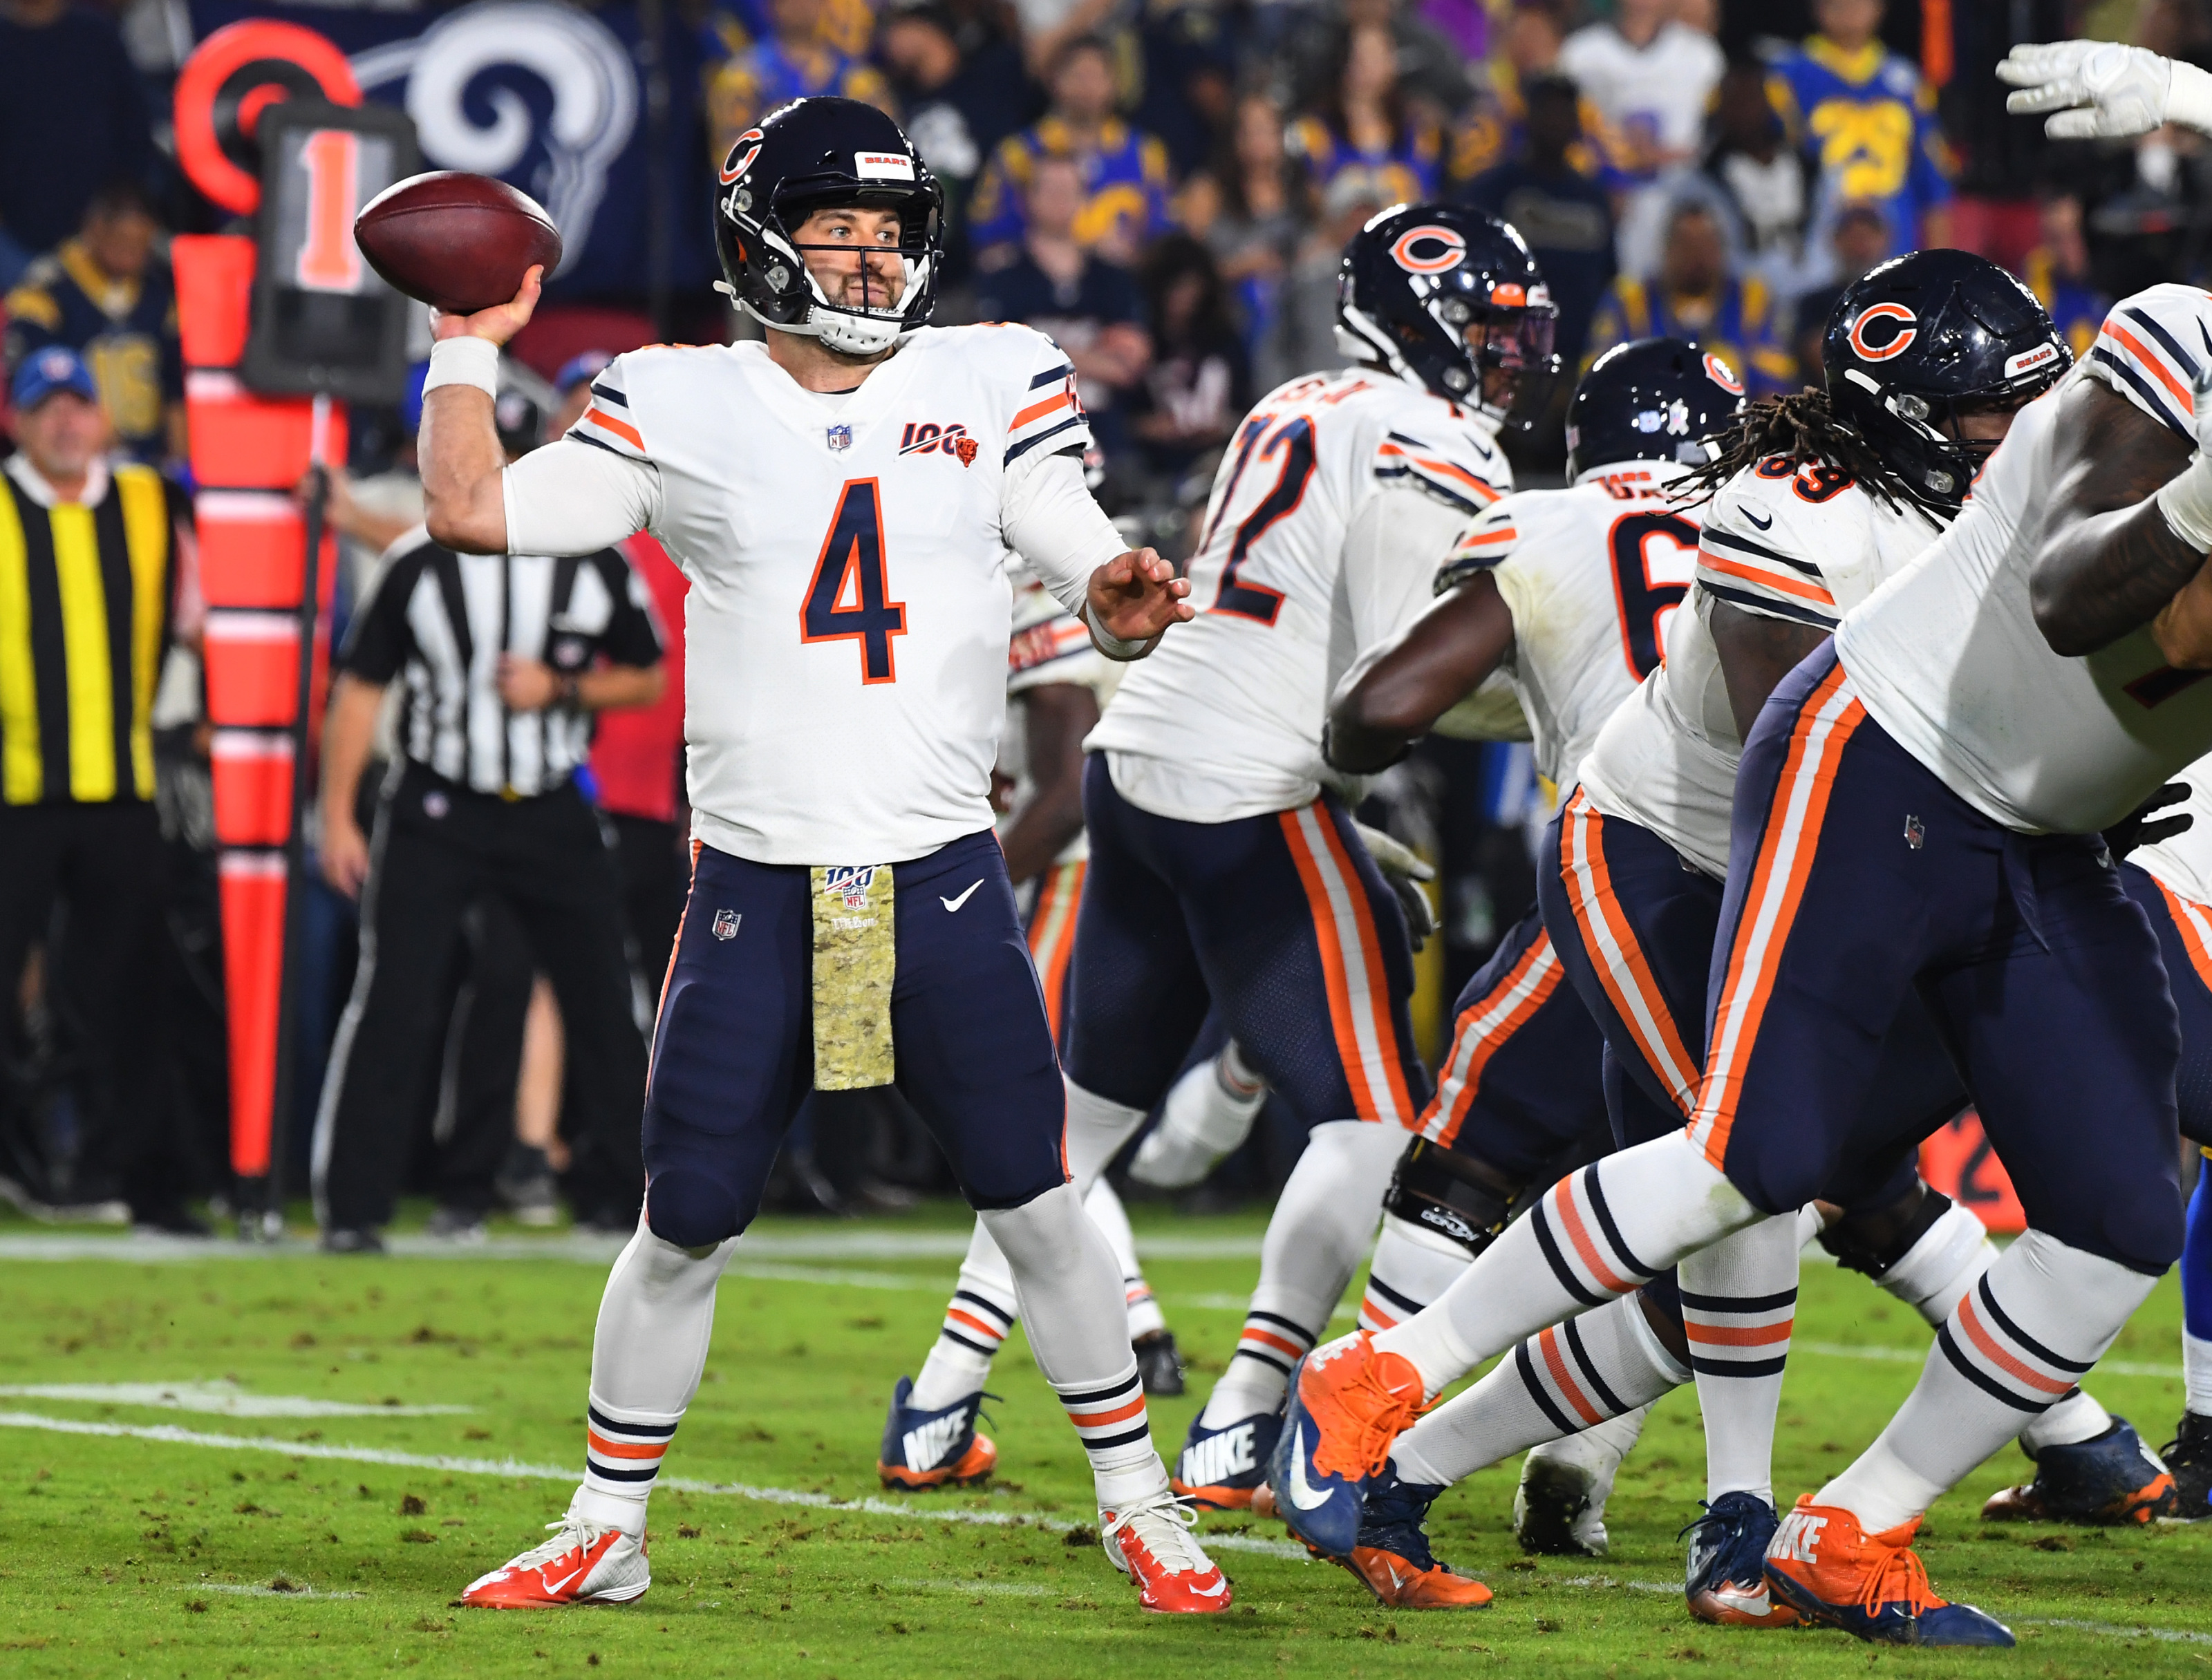 Chase Daniel fills in, leads Bears to 23-16 win over Lions